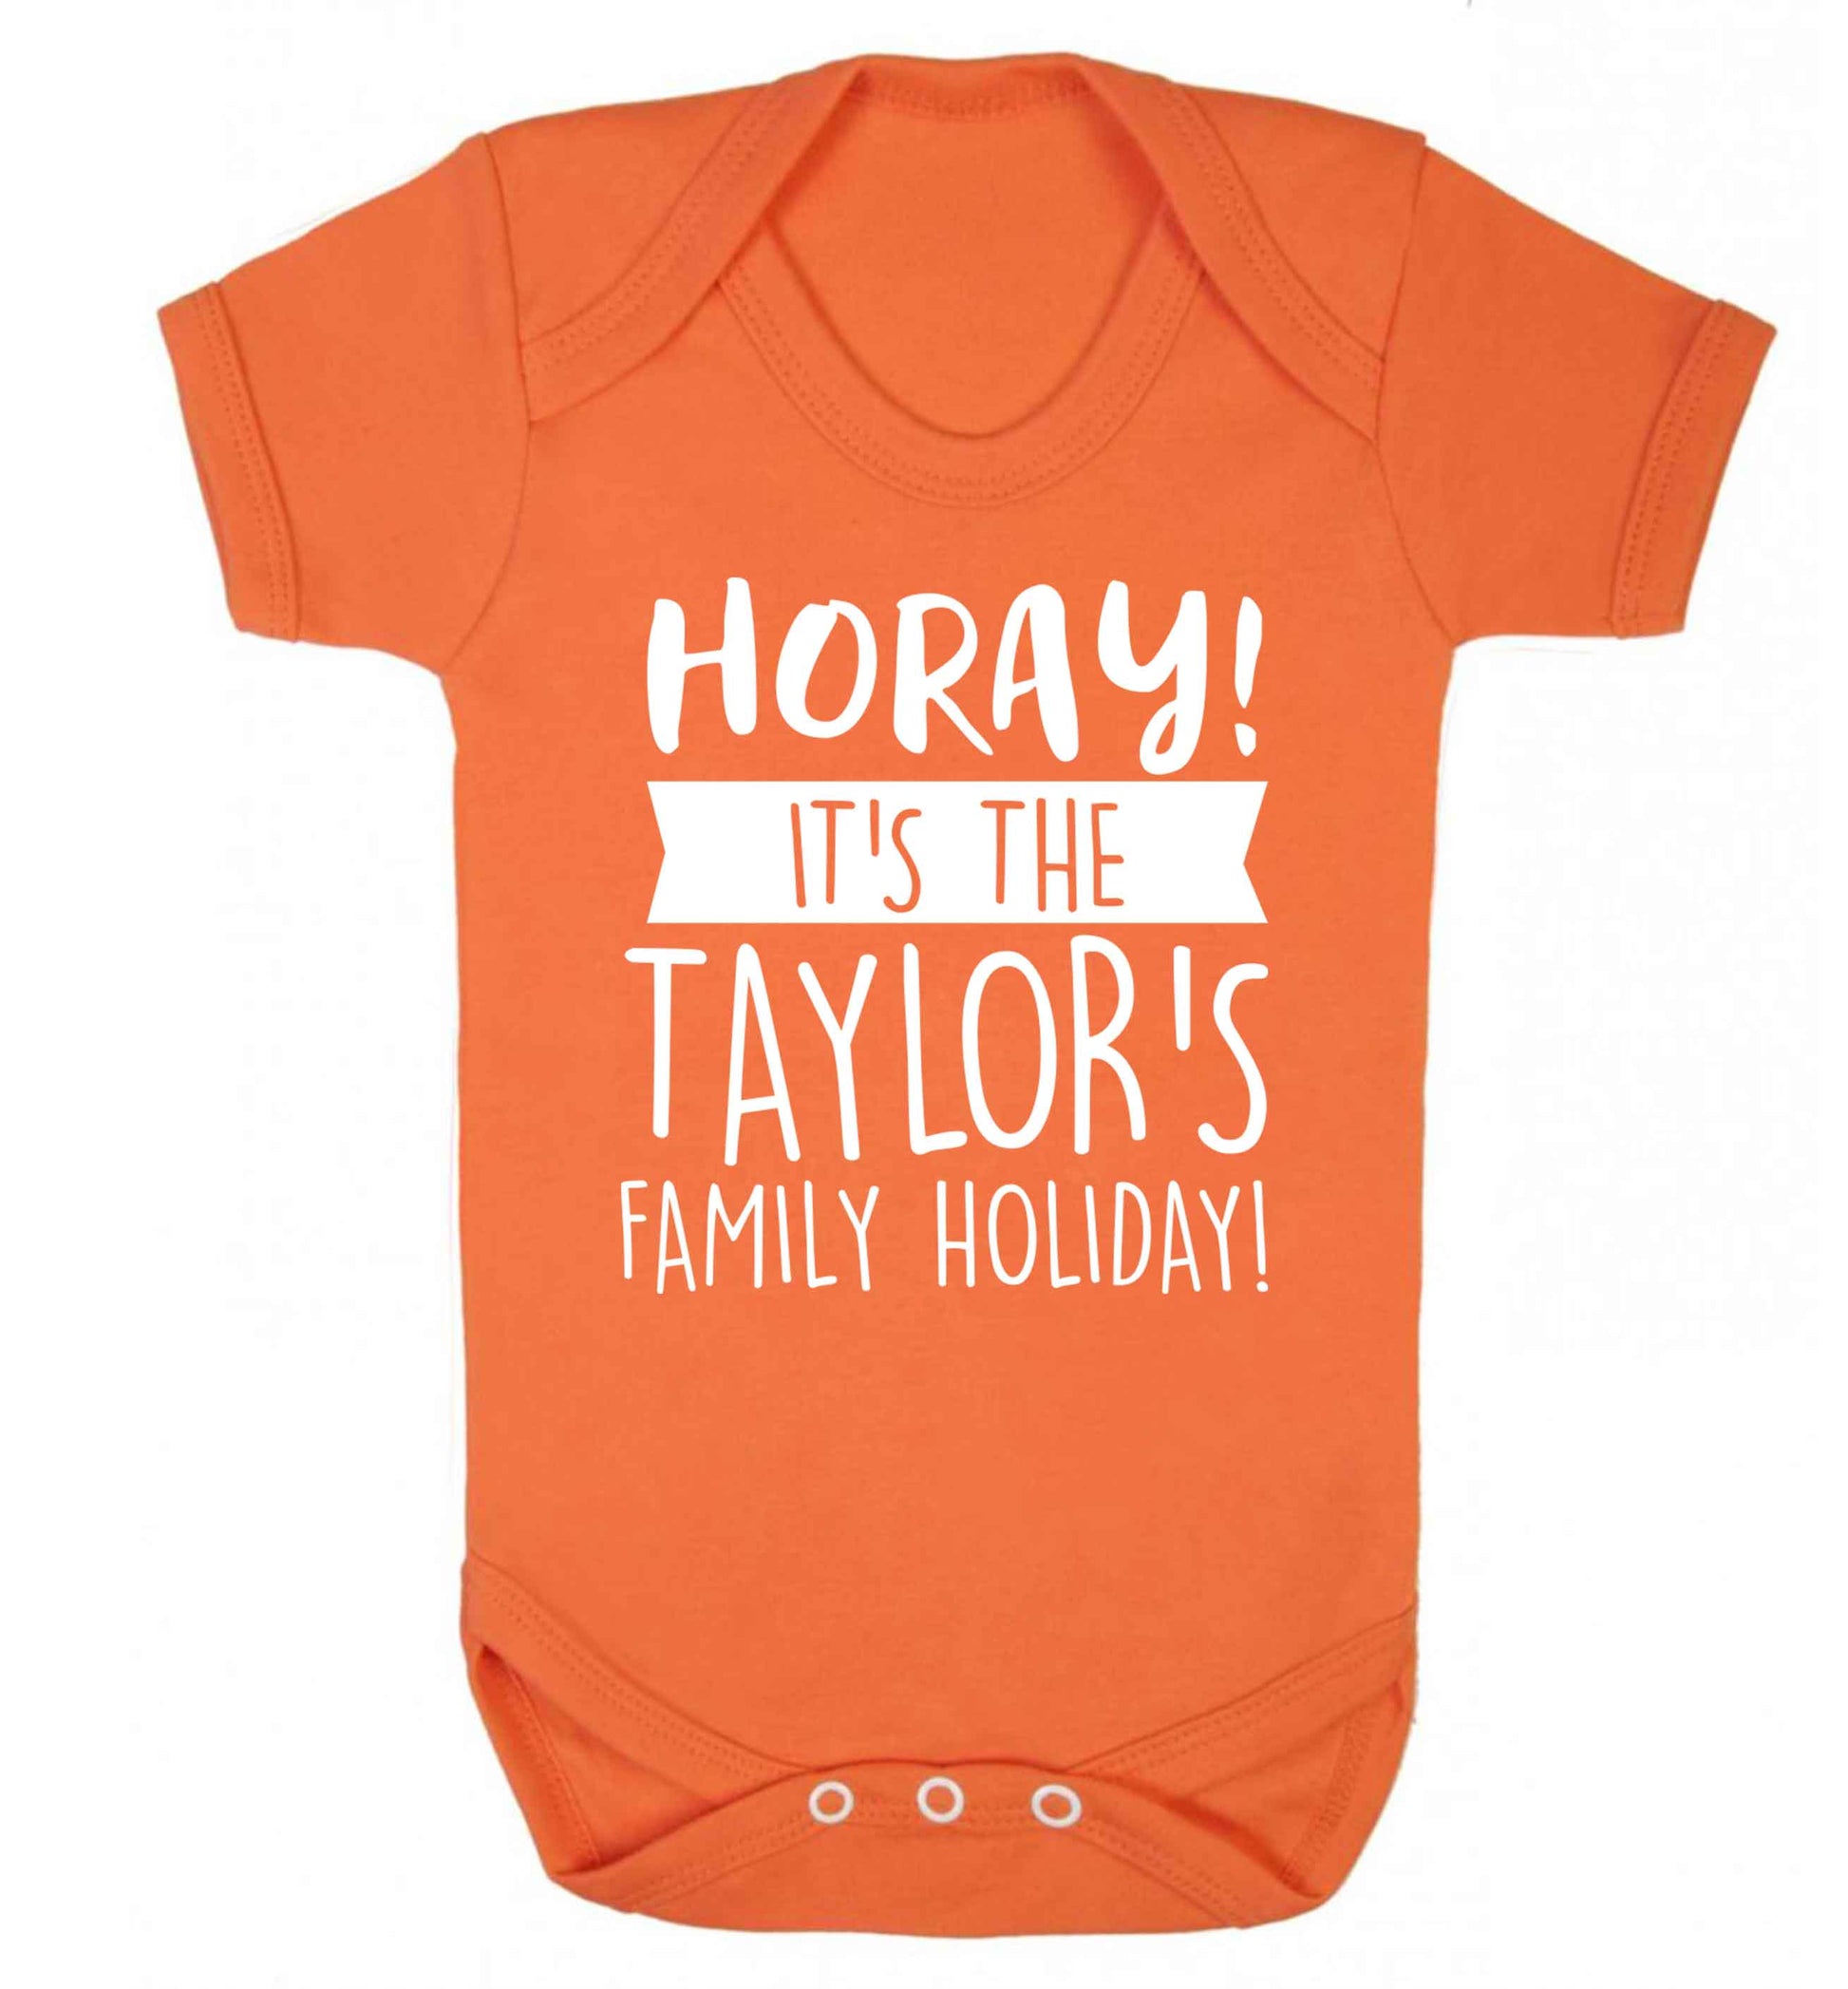 Horay it's the Taylor's family holiday! personalised item Baby Vest orange 18-24 months